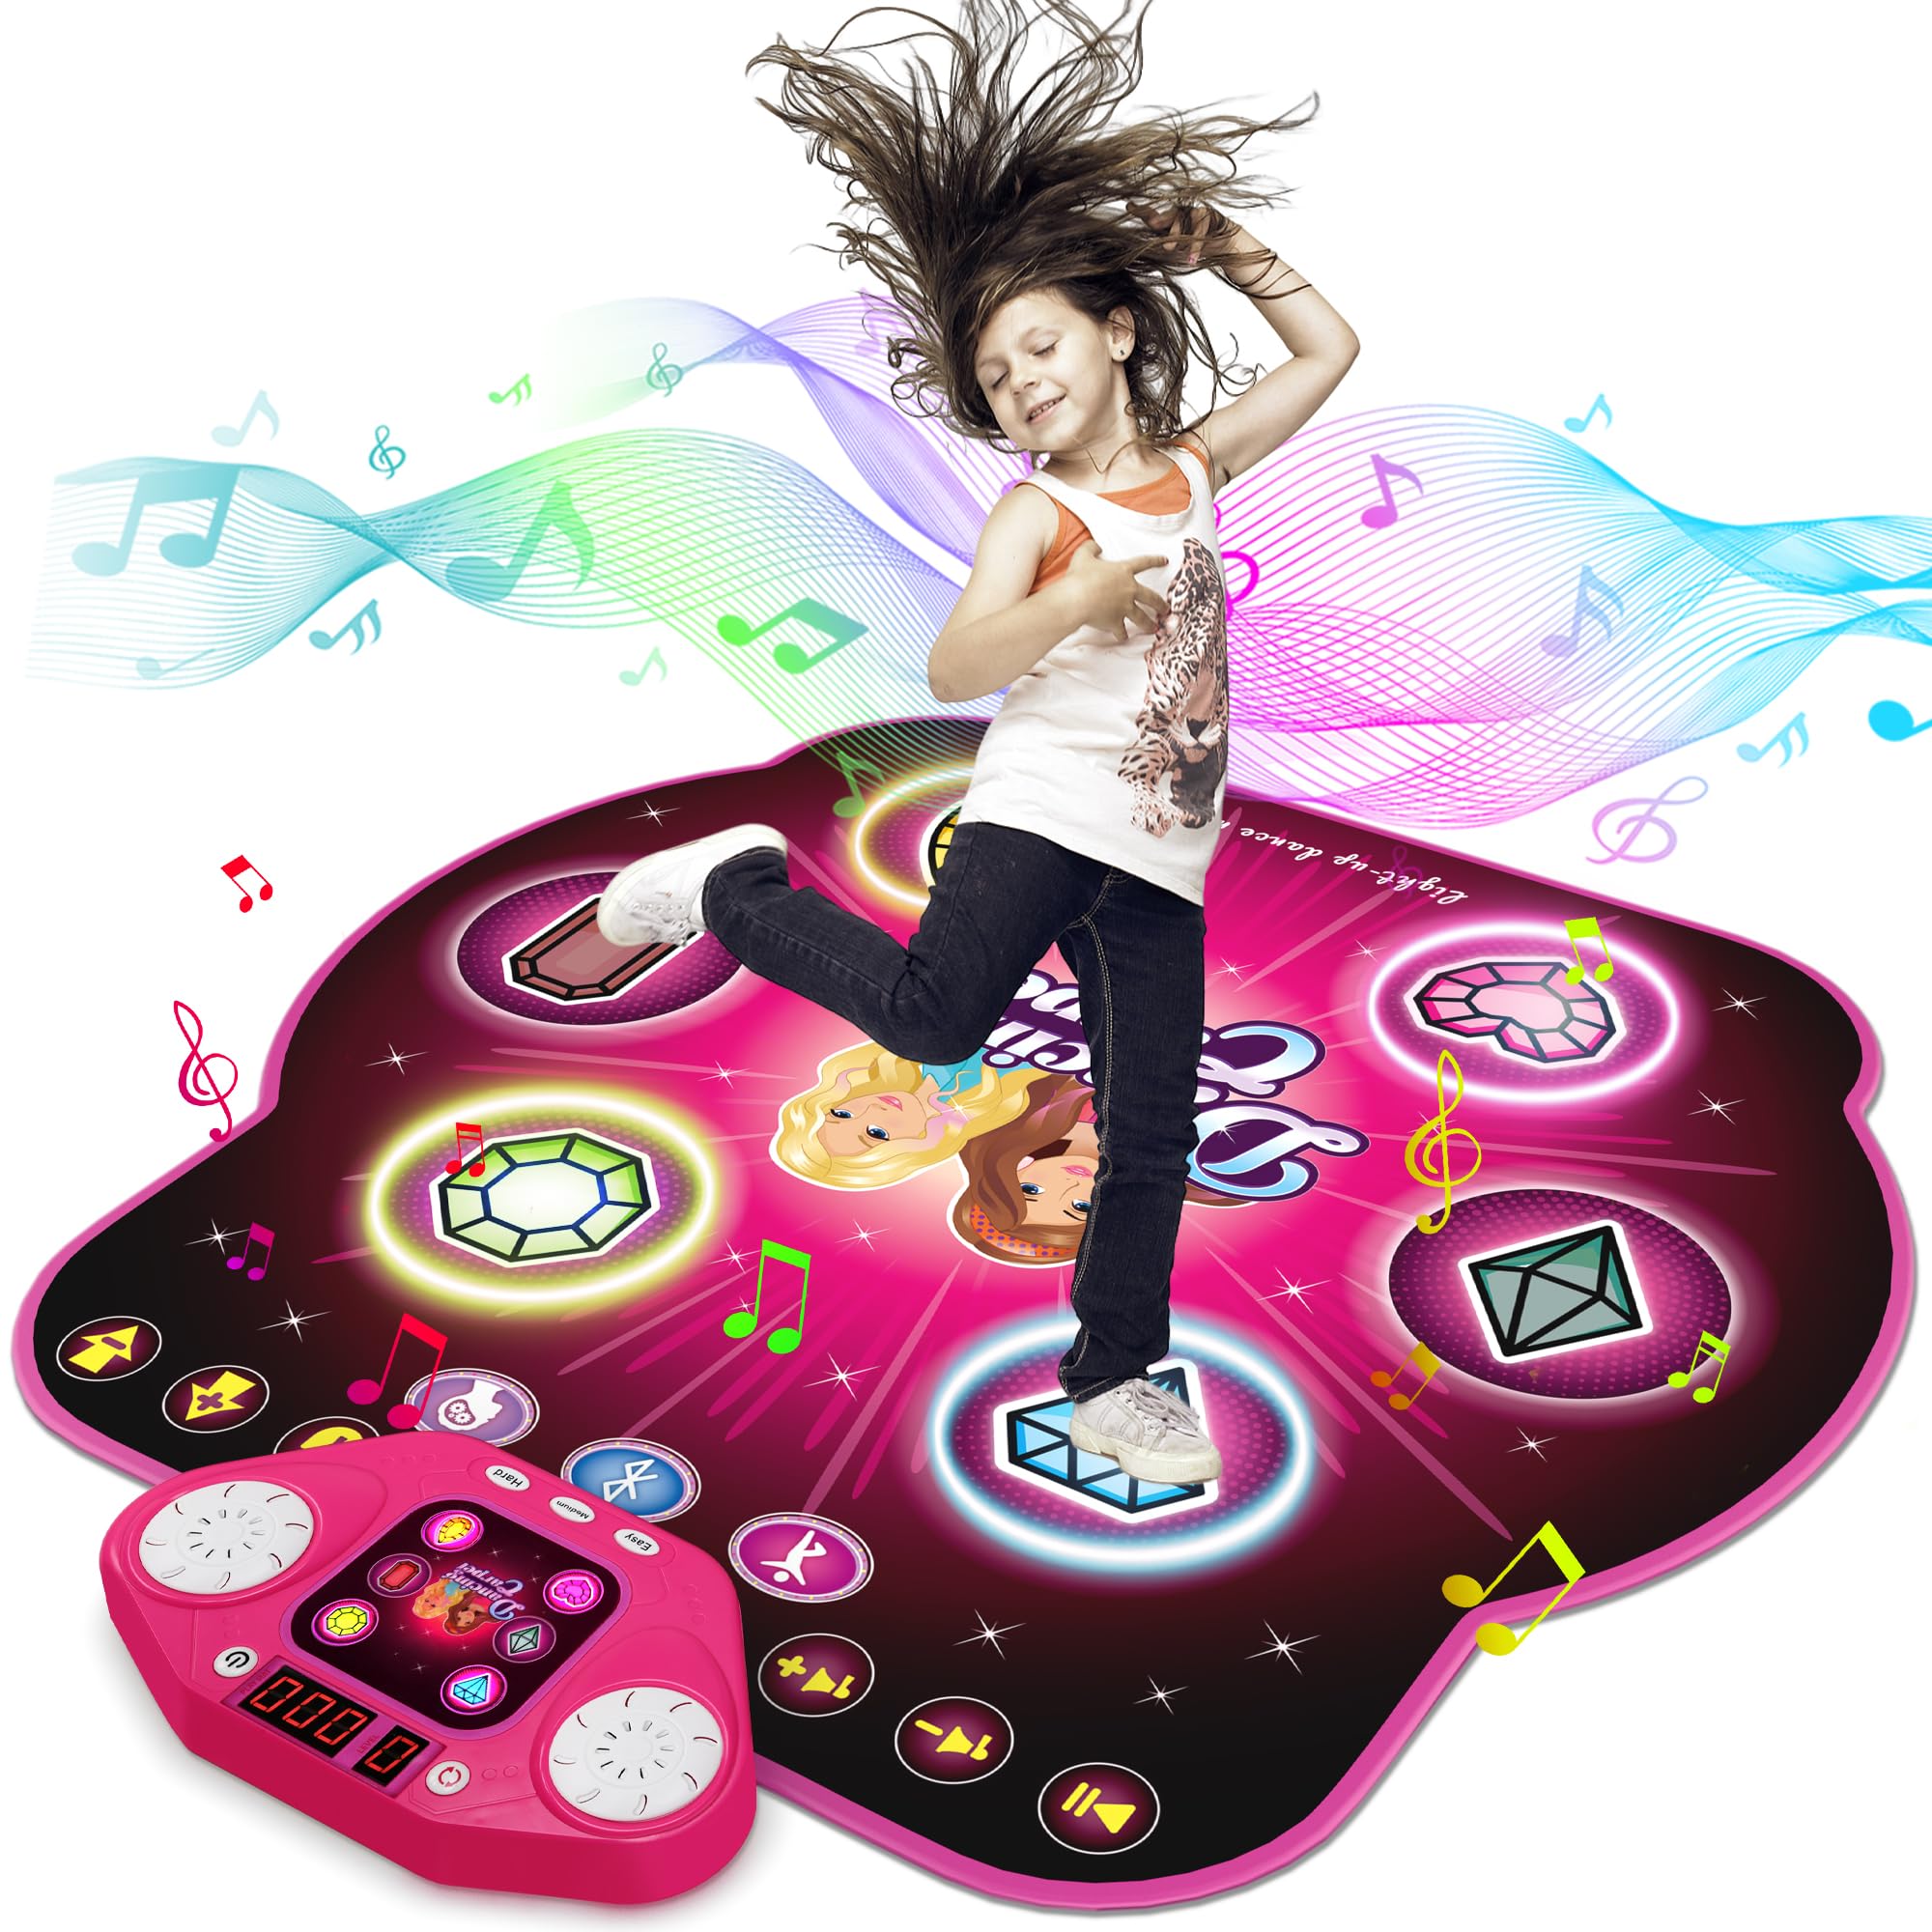 ANNKIE Light Up Dance Toy for 3-12 Year Old Girls & Boys,Gifts for Kids Age 3+